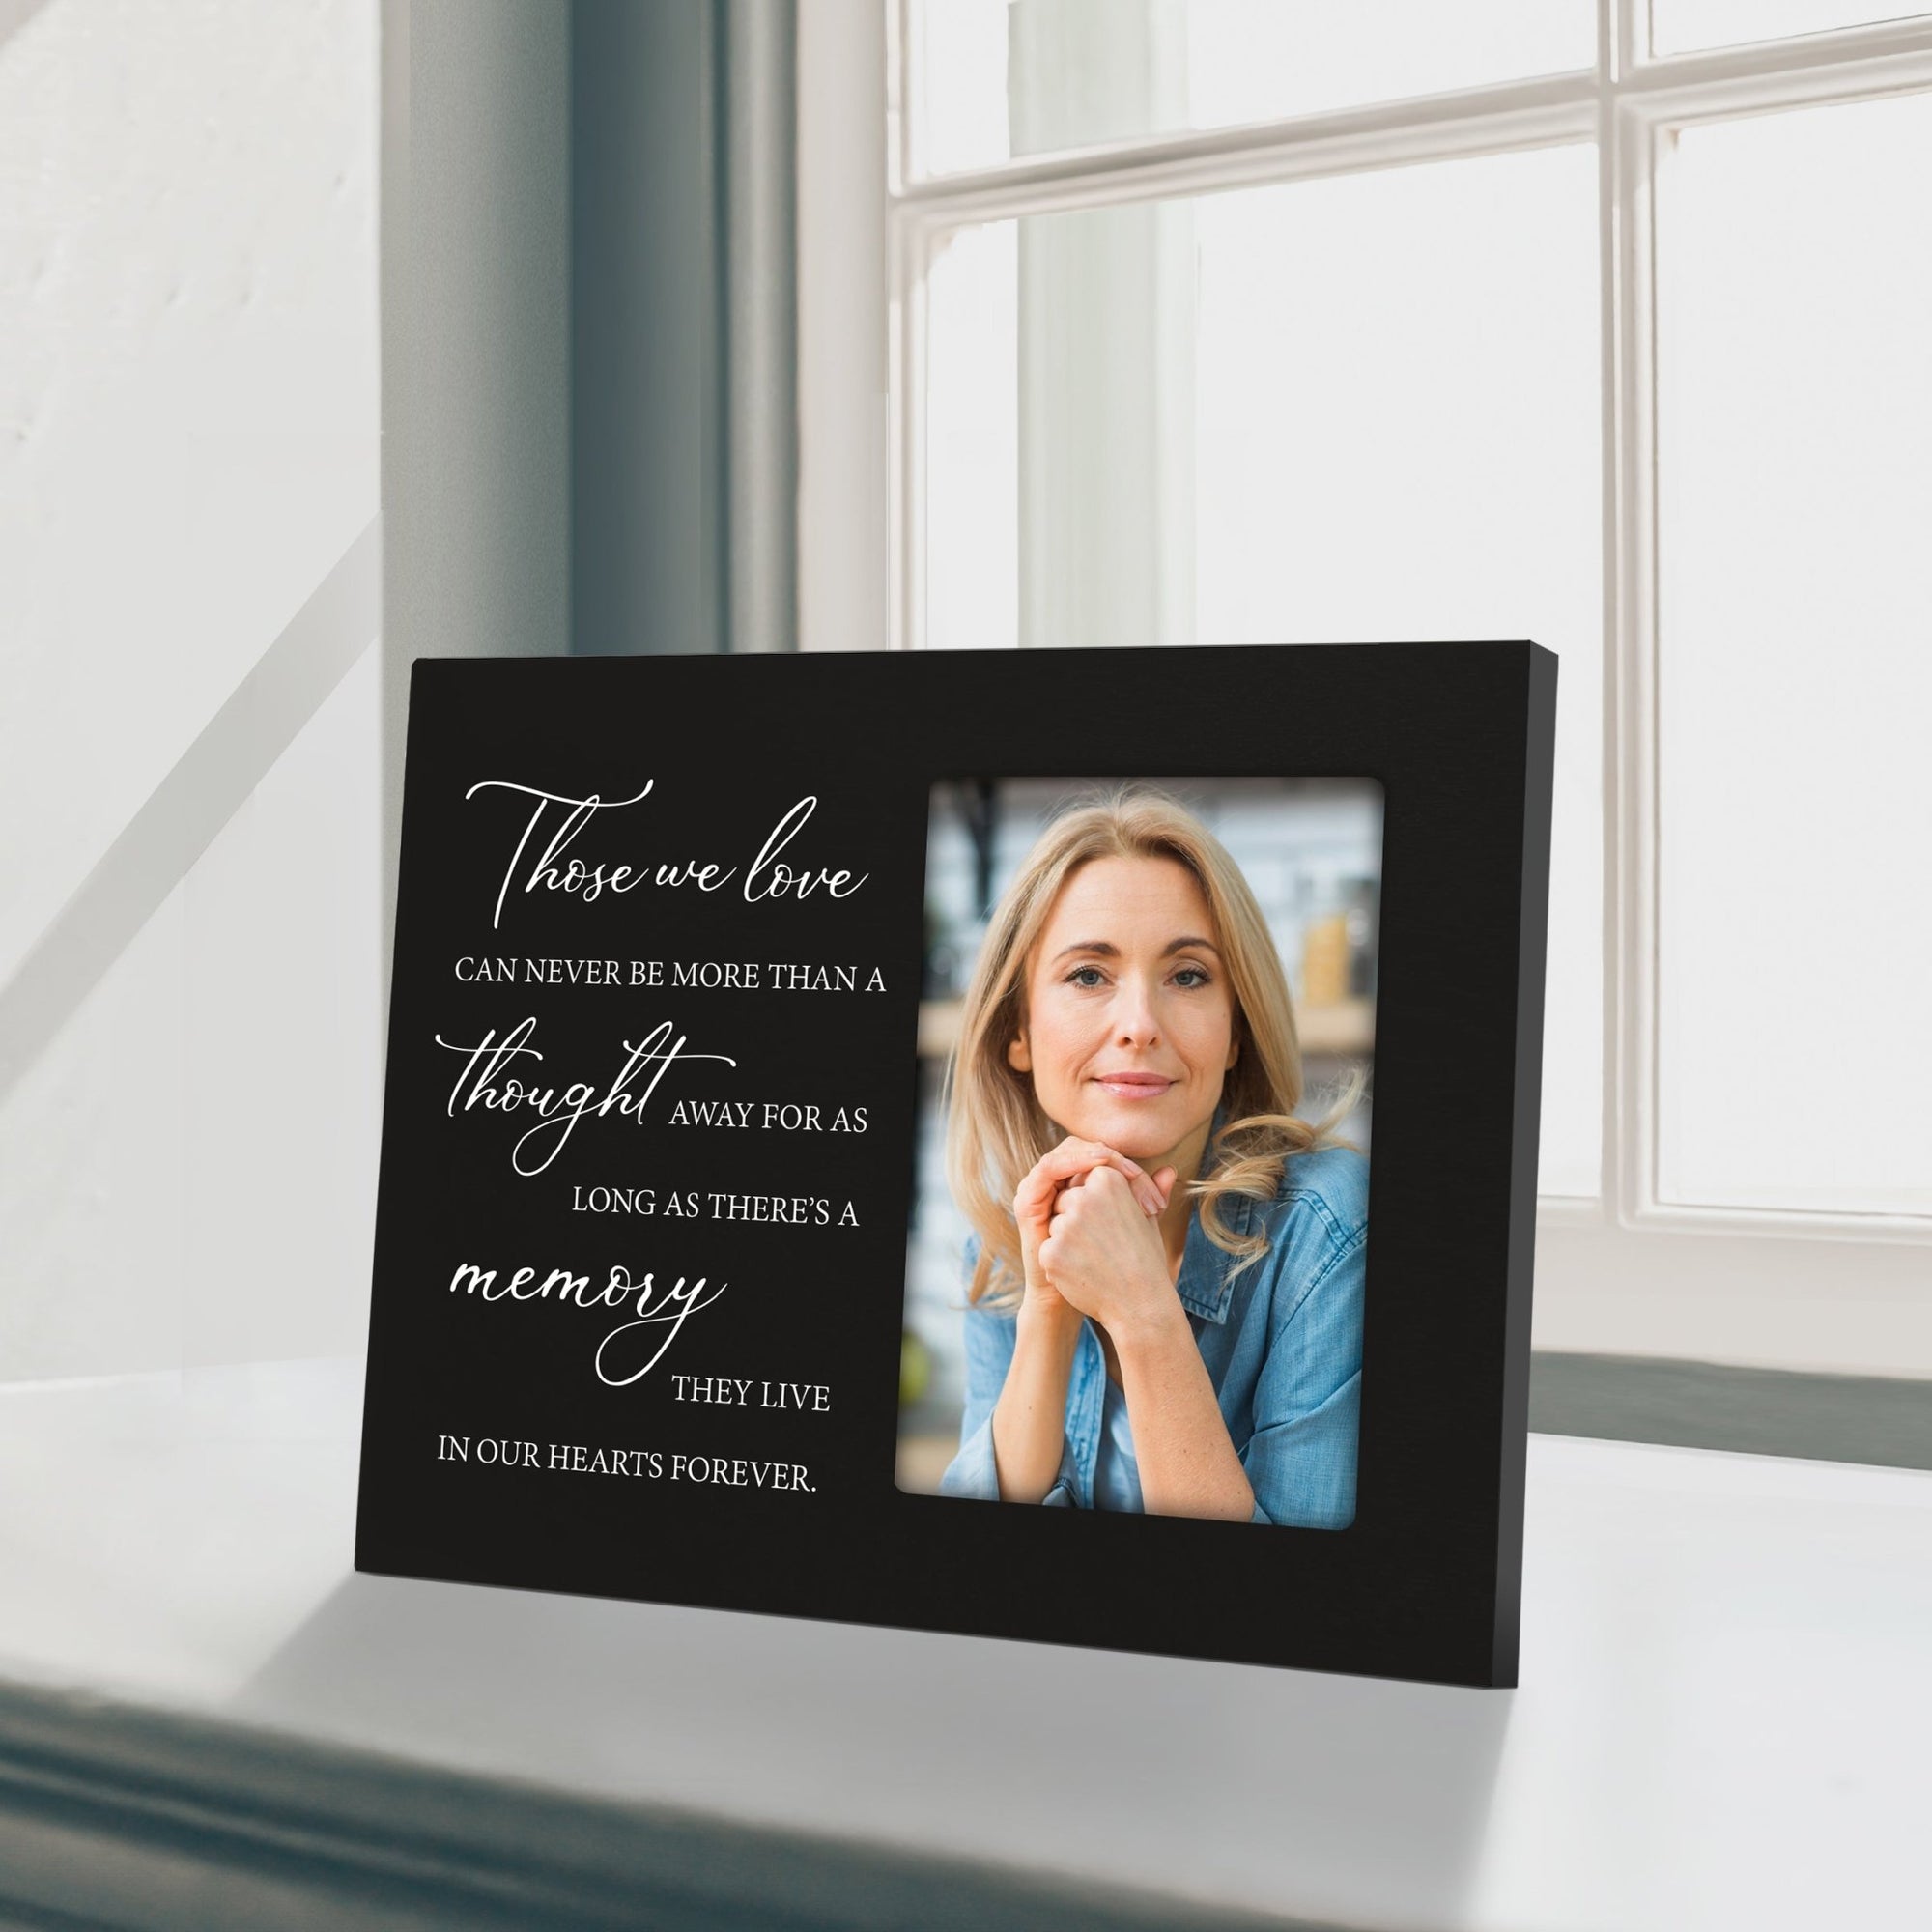 Rustic-Inspired Wooden Human Memorial Frames That Holds A 4x6in Photo - Those We Love (Script) - LifeSong Milestones